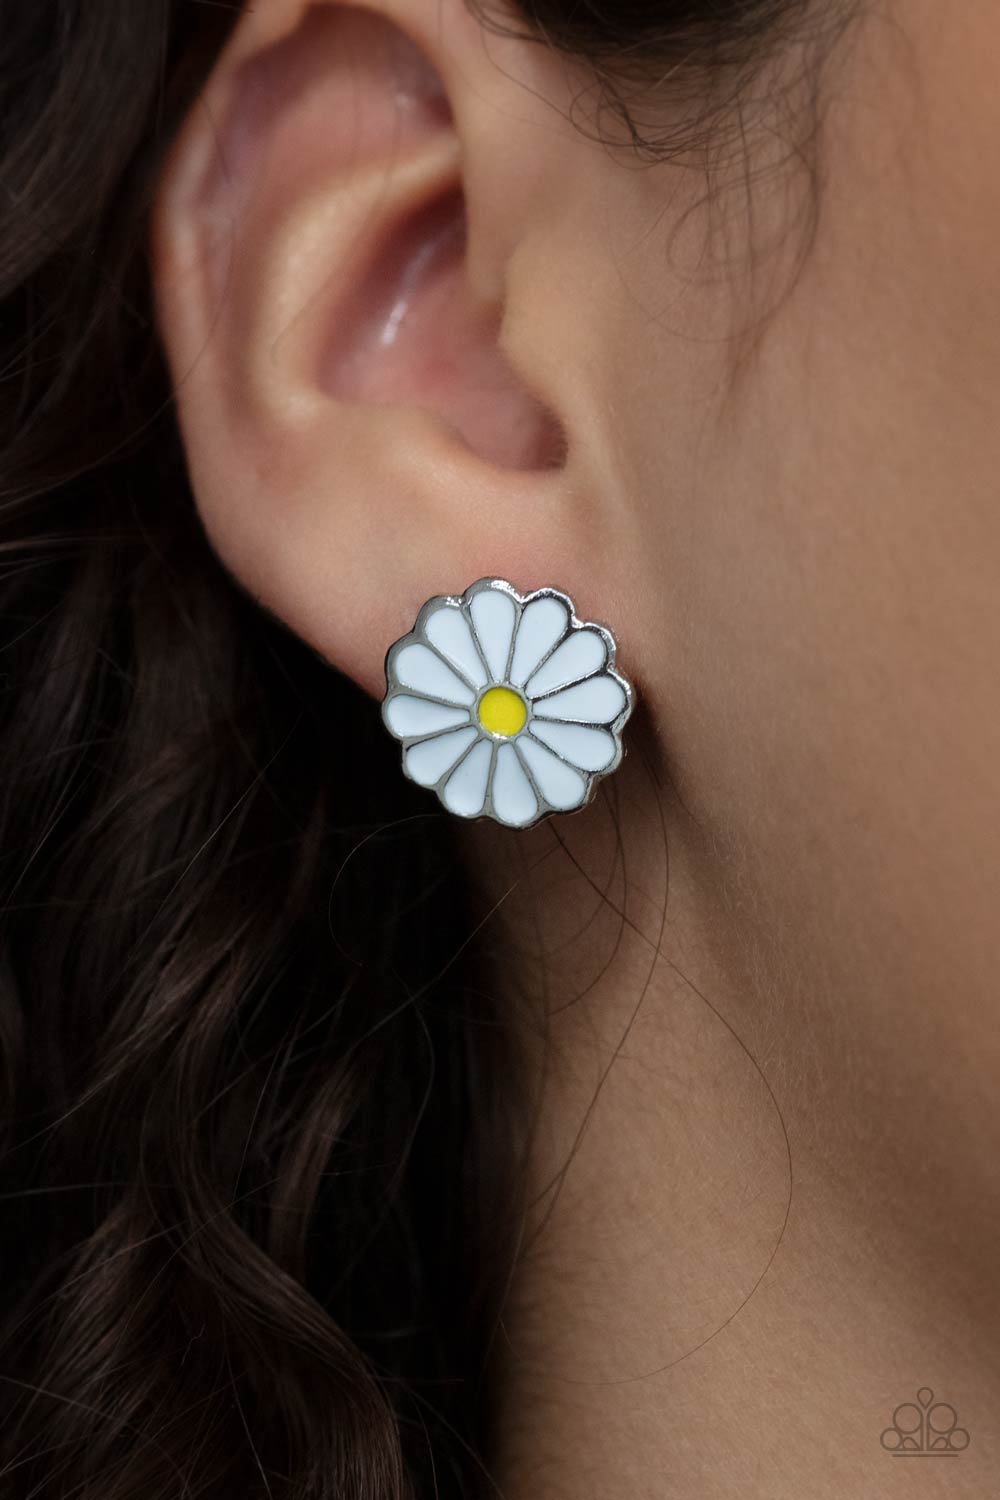 Budding Out Earrings - White